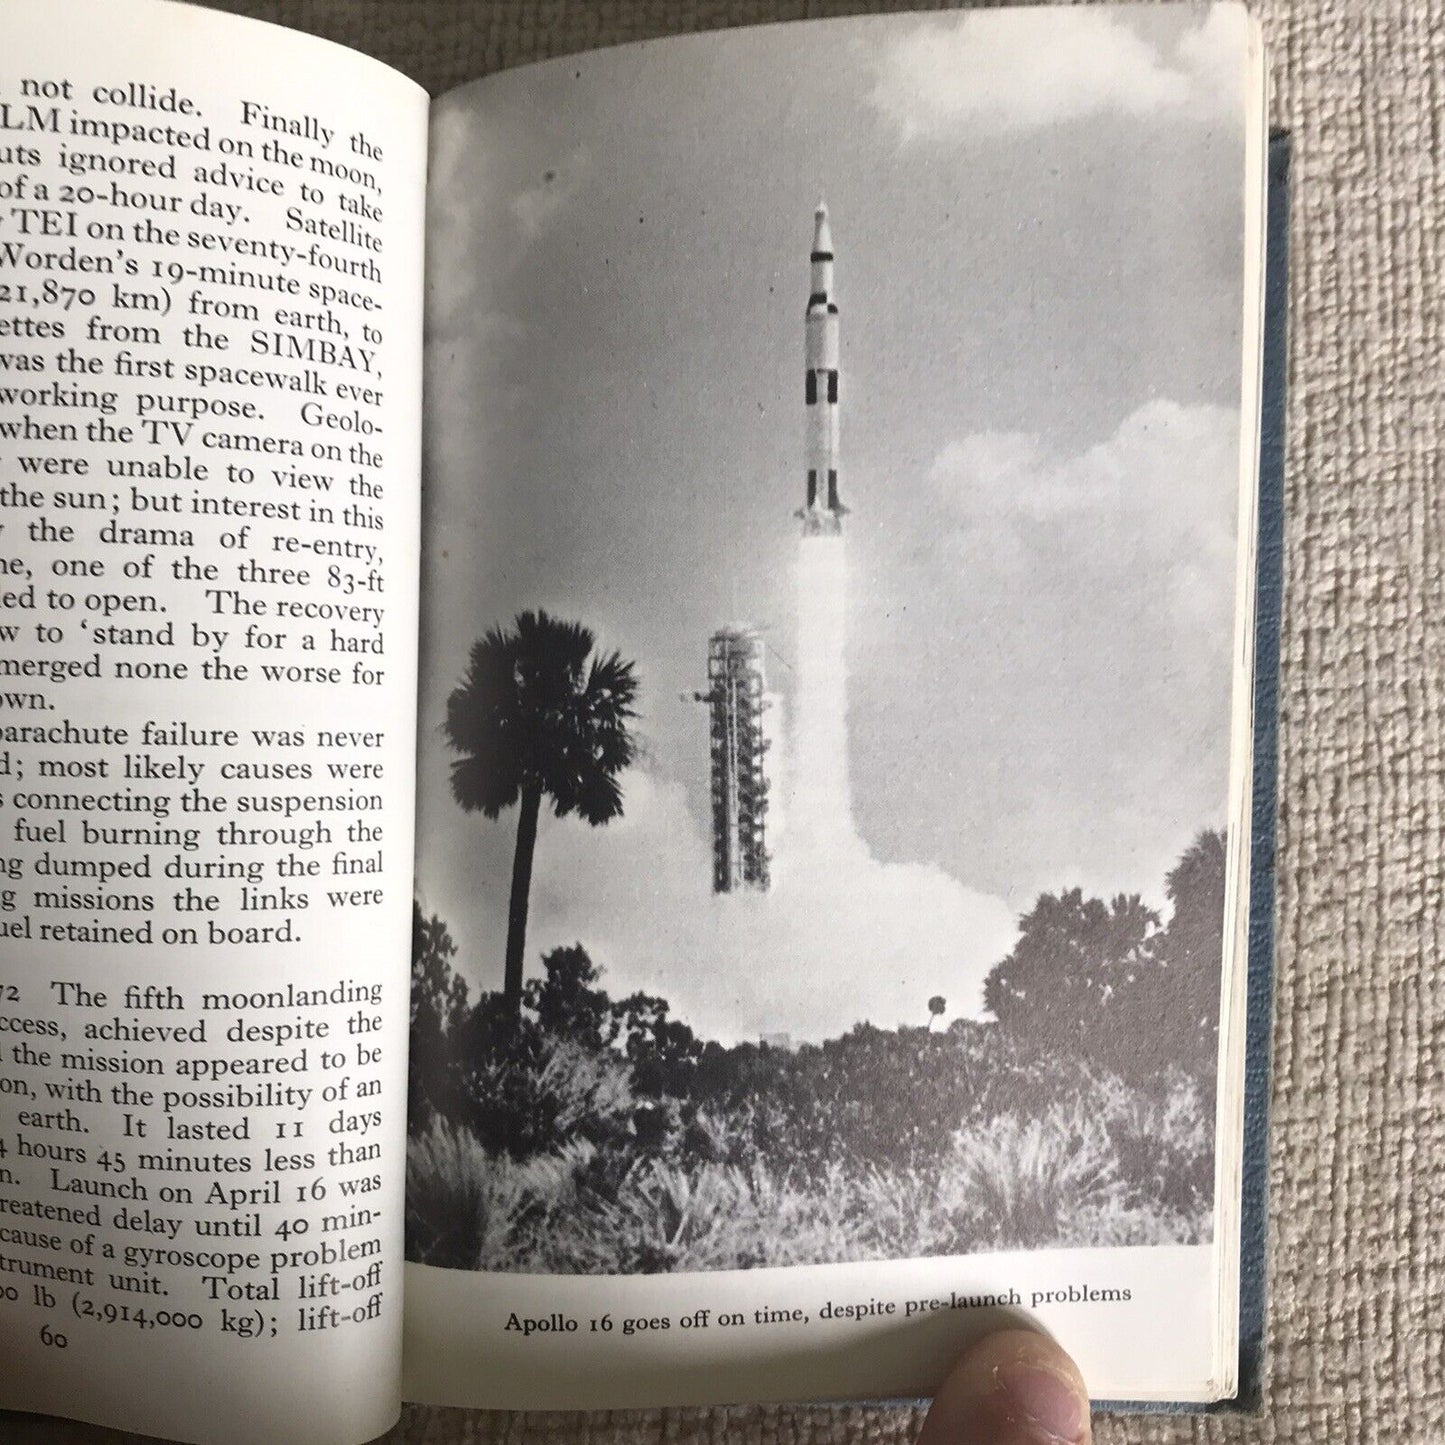 1972*1st*Observer's Book of Manned Space Flight by Reginald Turnill